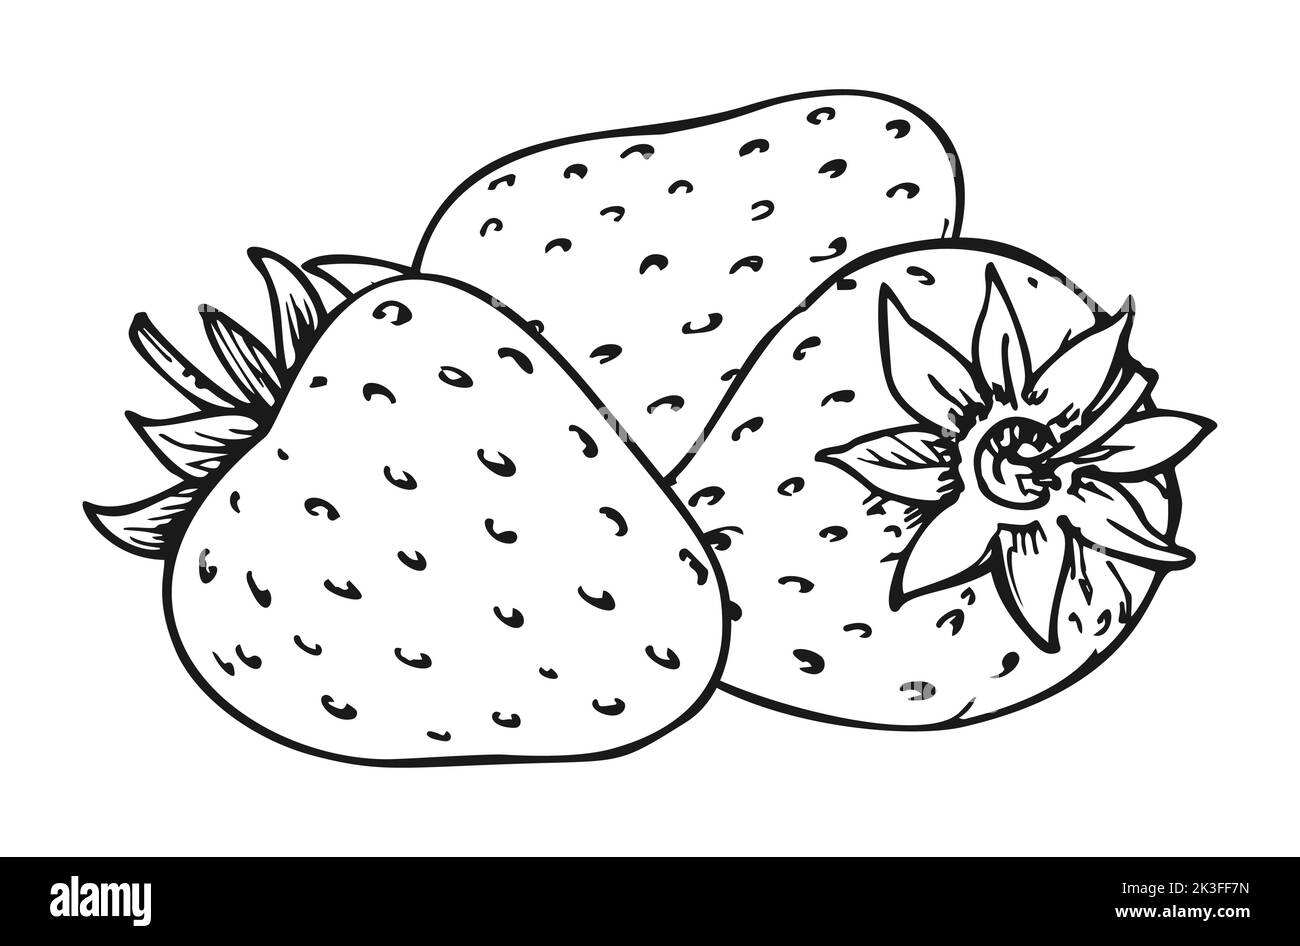 Strawberry bunch of three berries. Whole ripe wild forest berry closeup. Tasty sweet fresh fruit. Children and adults coloring book page. Juicy strawberries handdrawn clip art black and white sketch Stock Vector